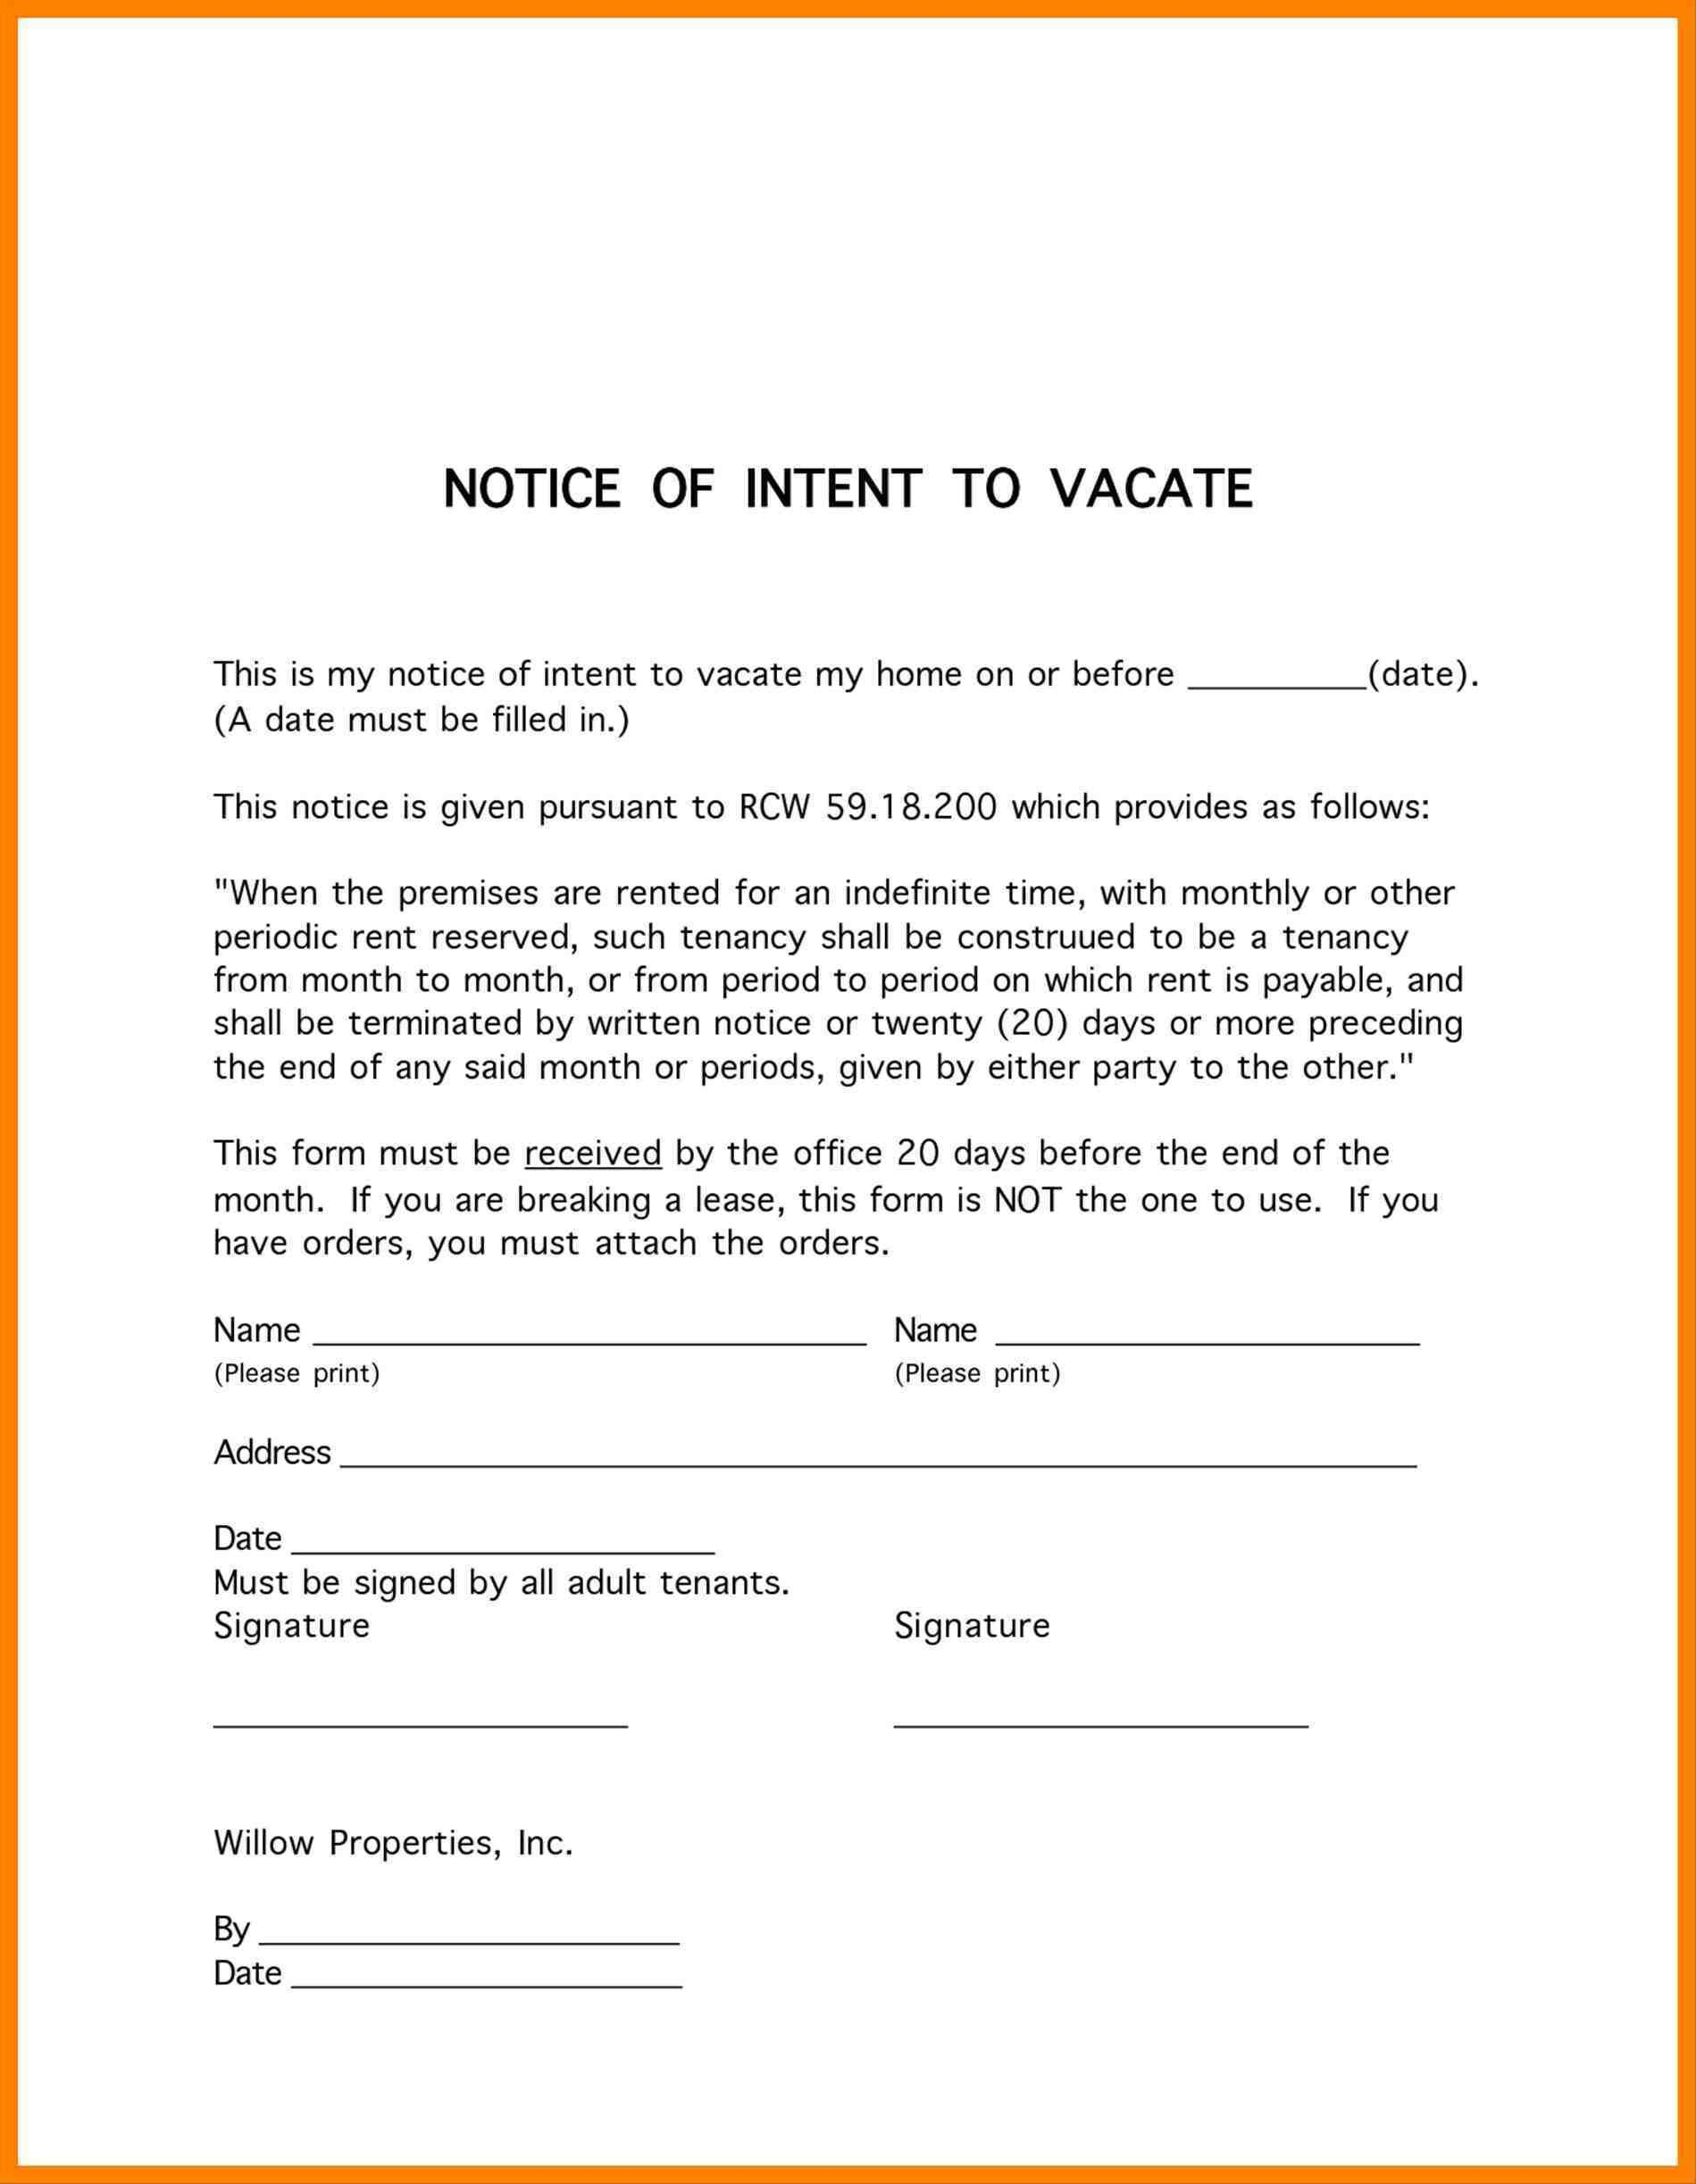 Final Notice before Legal Action Letter Template Uk - Final Notice before Legal Best Collections Notice Template Photos Of